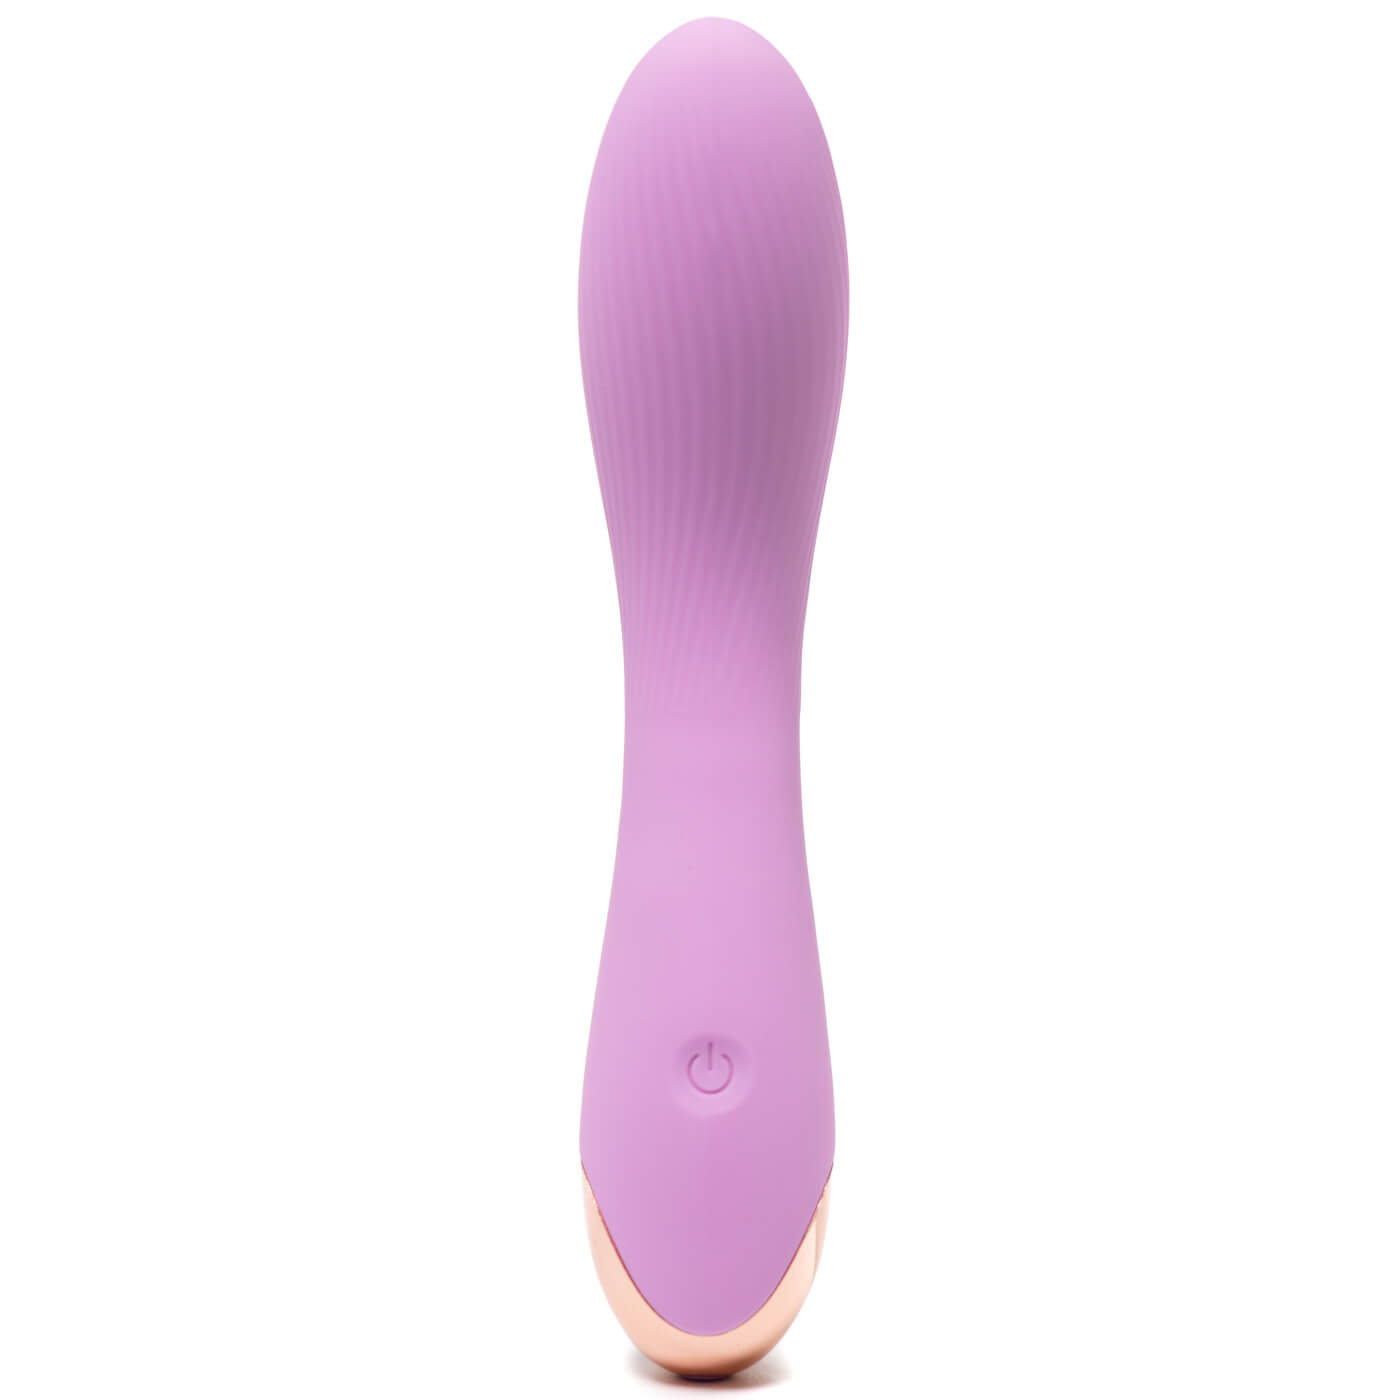 GRAVITATE Luxury 20 Function Rechargeable Extra Quiet Powerful G-Spot Massager